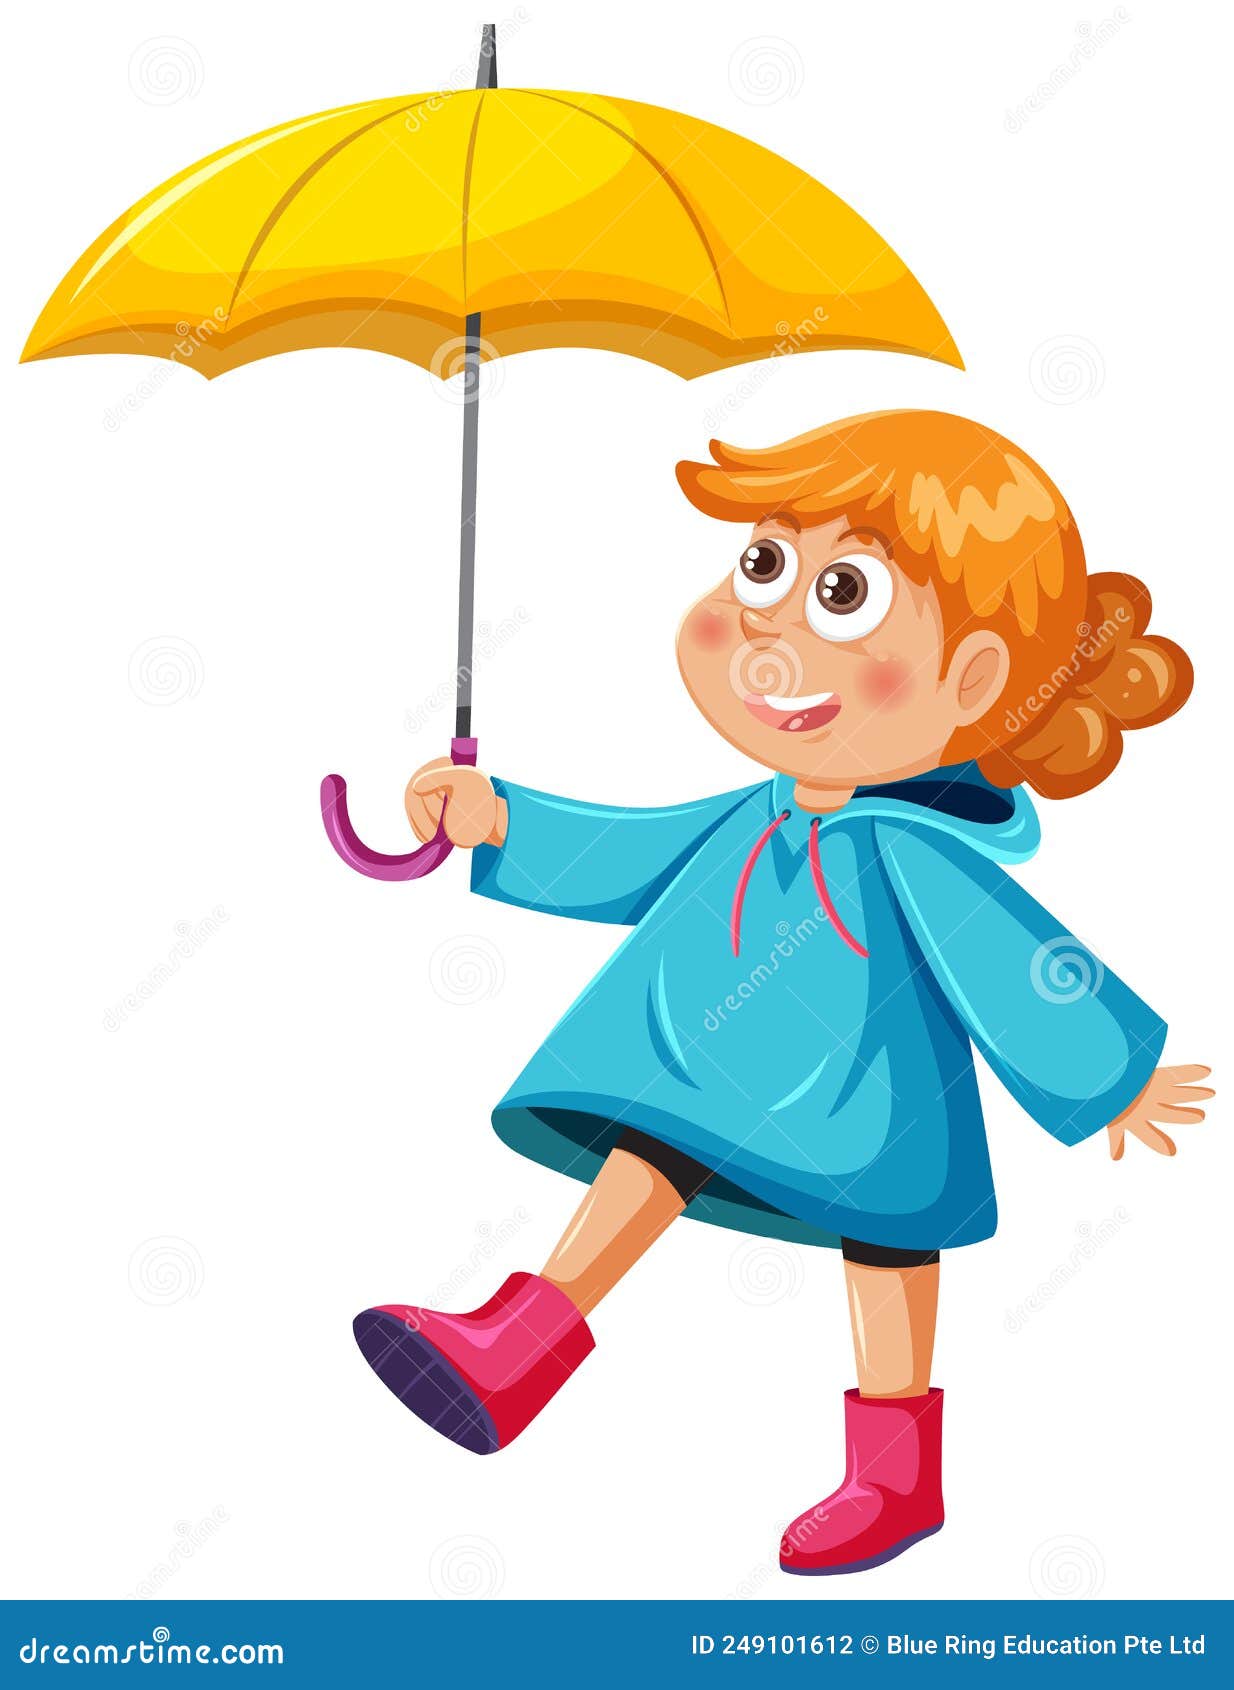 A Girl Wearing Raincoat and Holding Umbrella Stock Vector ...